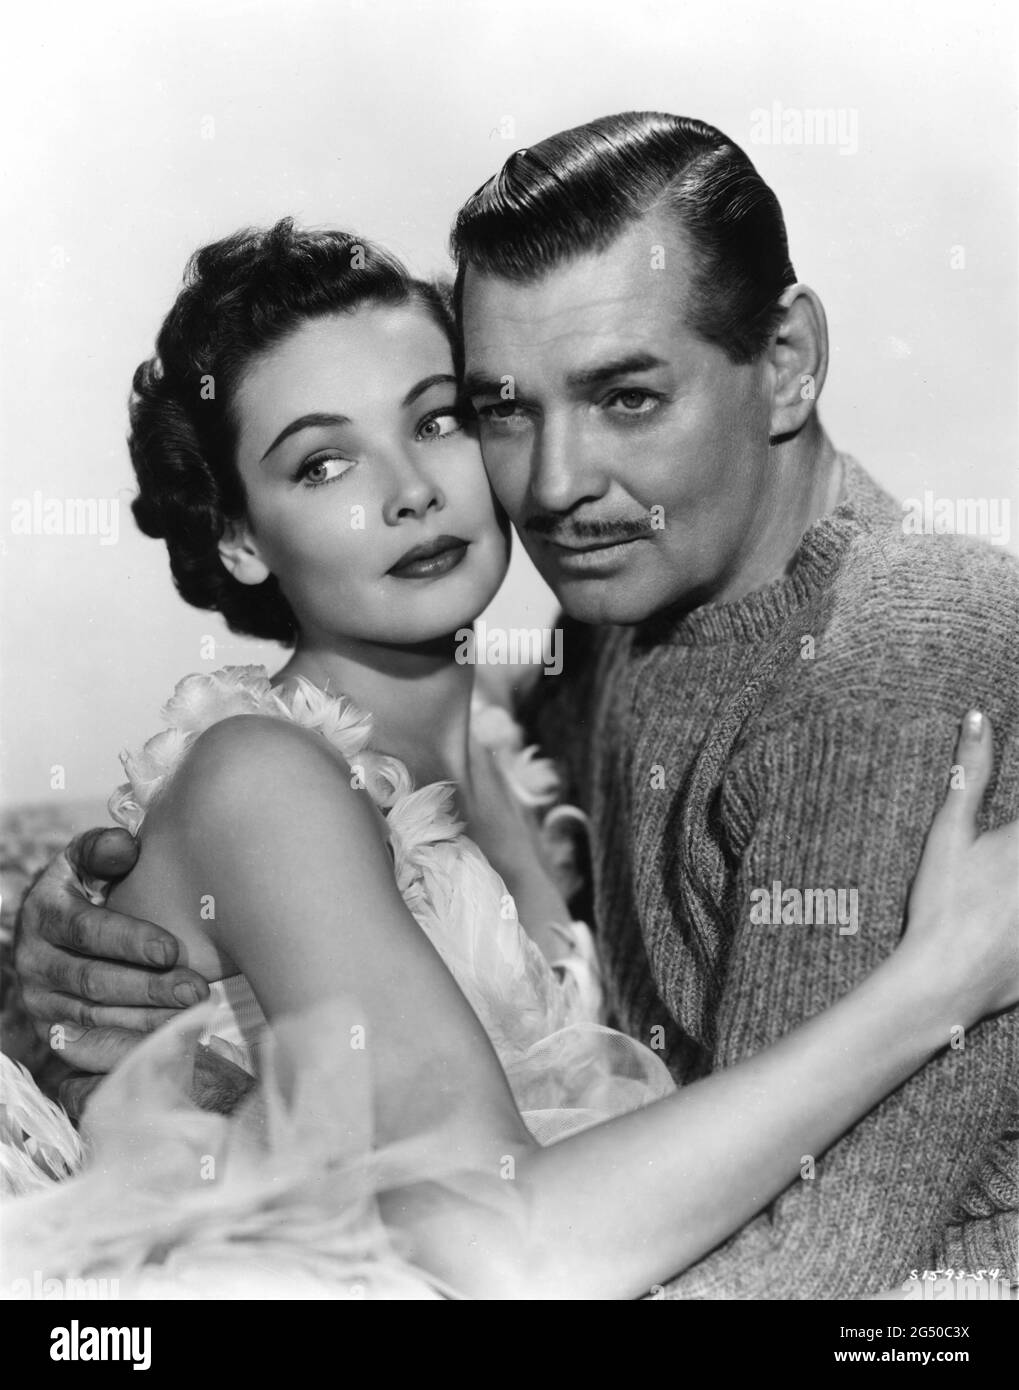 GENE TIERNEY and CLARK GABLE Publicity Portrait in NEVER LET ME GO 1953 director DELMER DAVES from novel Come The Dawn by Paul Winterton producer Clarence Brown Metro Goldwyn Mayer Stock Photo